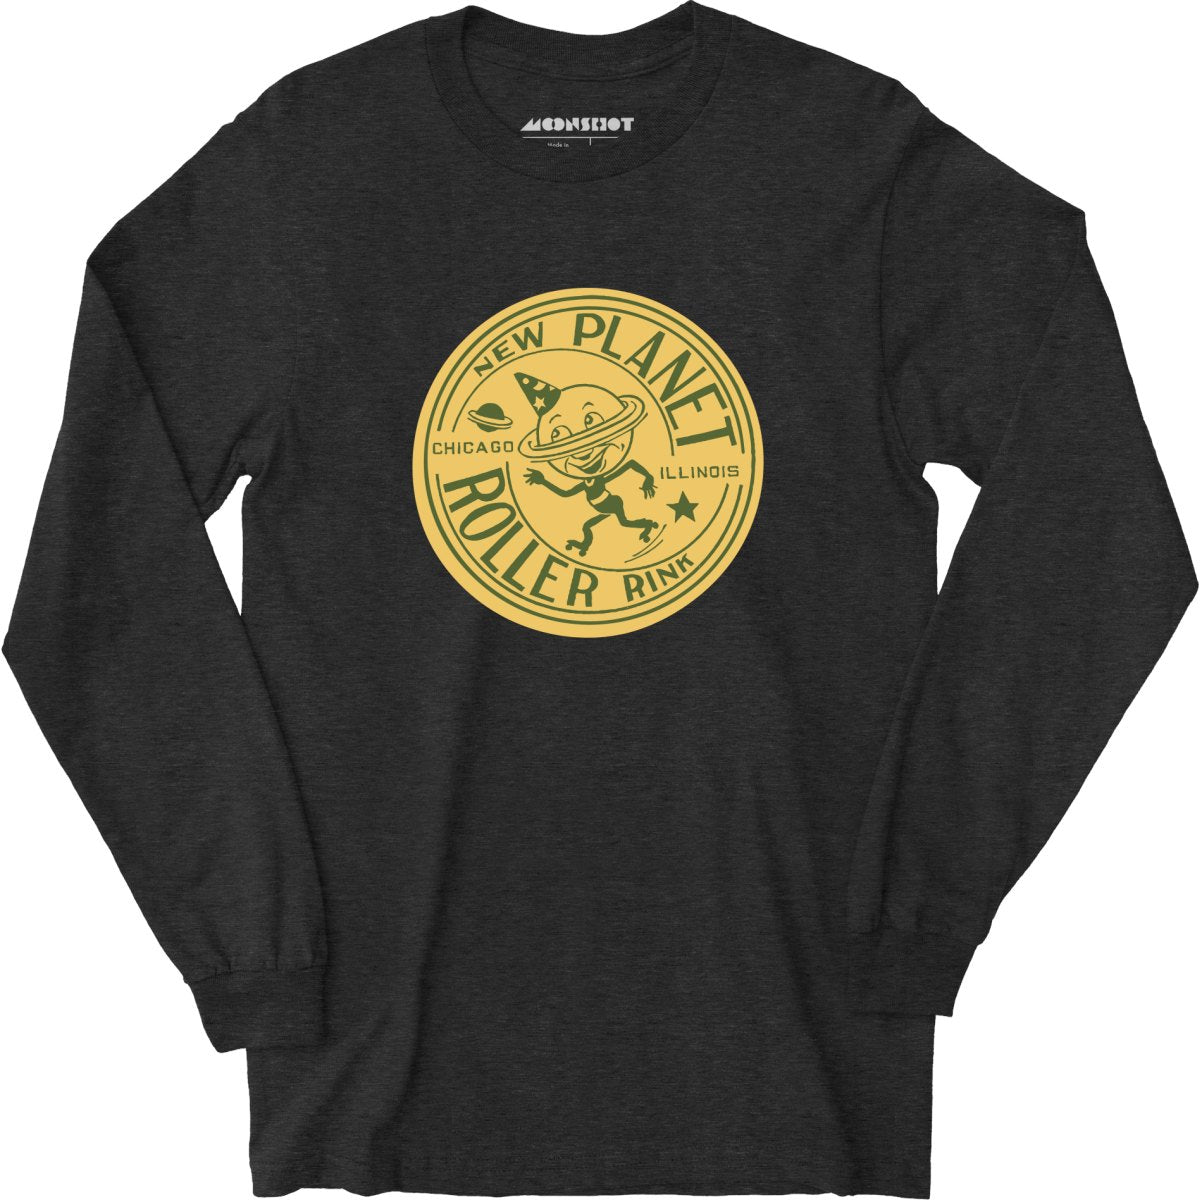 New Planet - Chicago, IL - Vintage Roller Rink - Long Sleeve T-Shirt